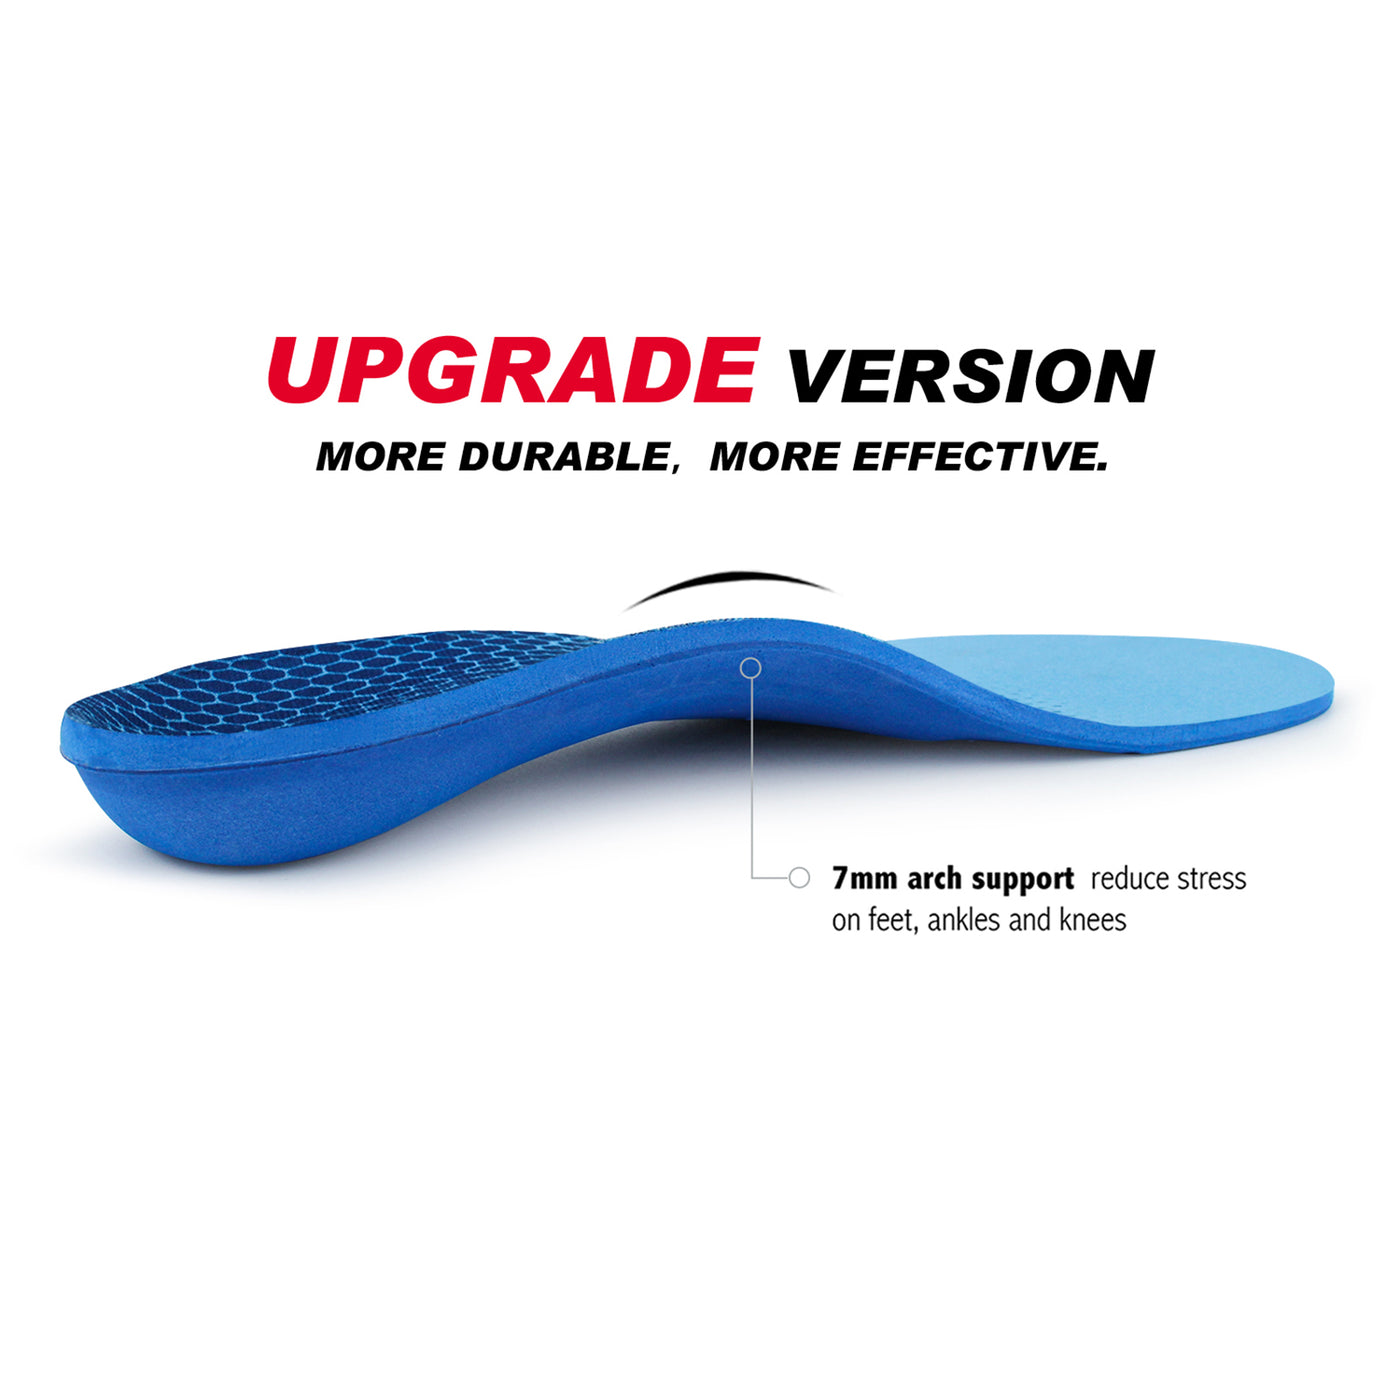 WALKHERO Men's Arch Support Orthotic Insoles Gray & New Blue & Blue 3-Pairs